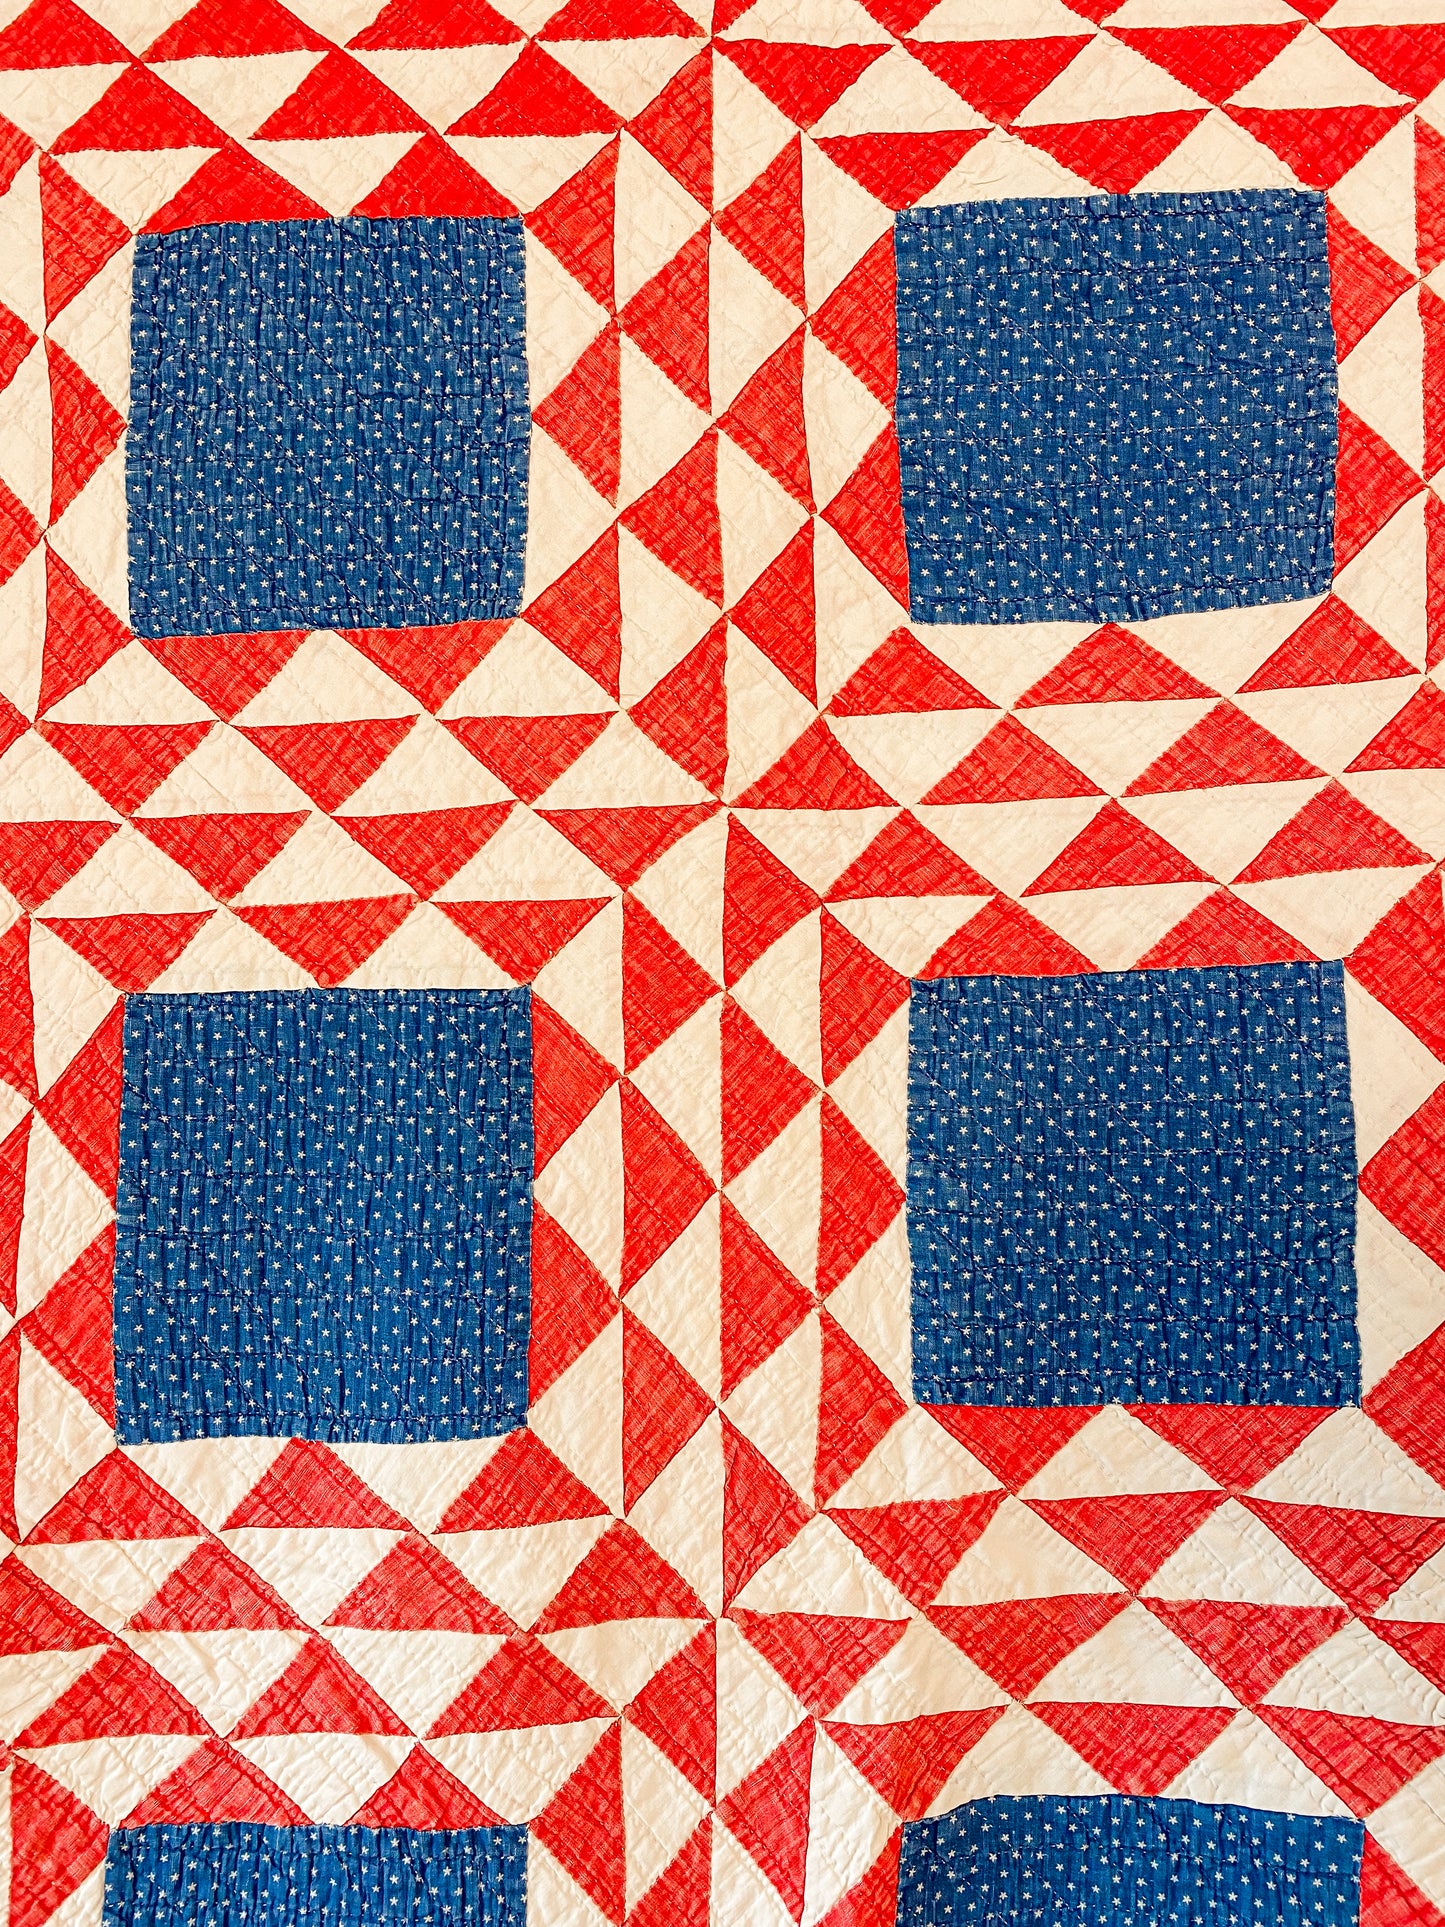 Antique Red White and Blue Ocean Waves Quilt, c1920